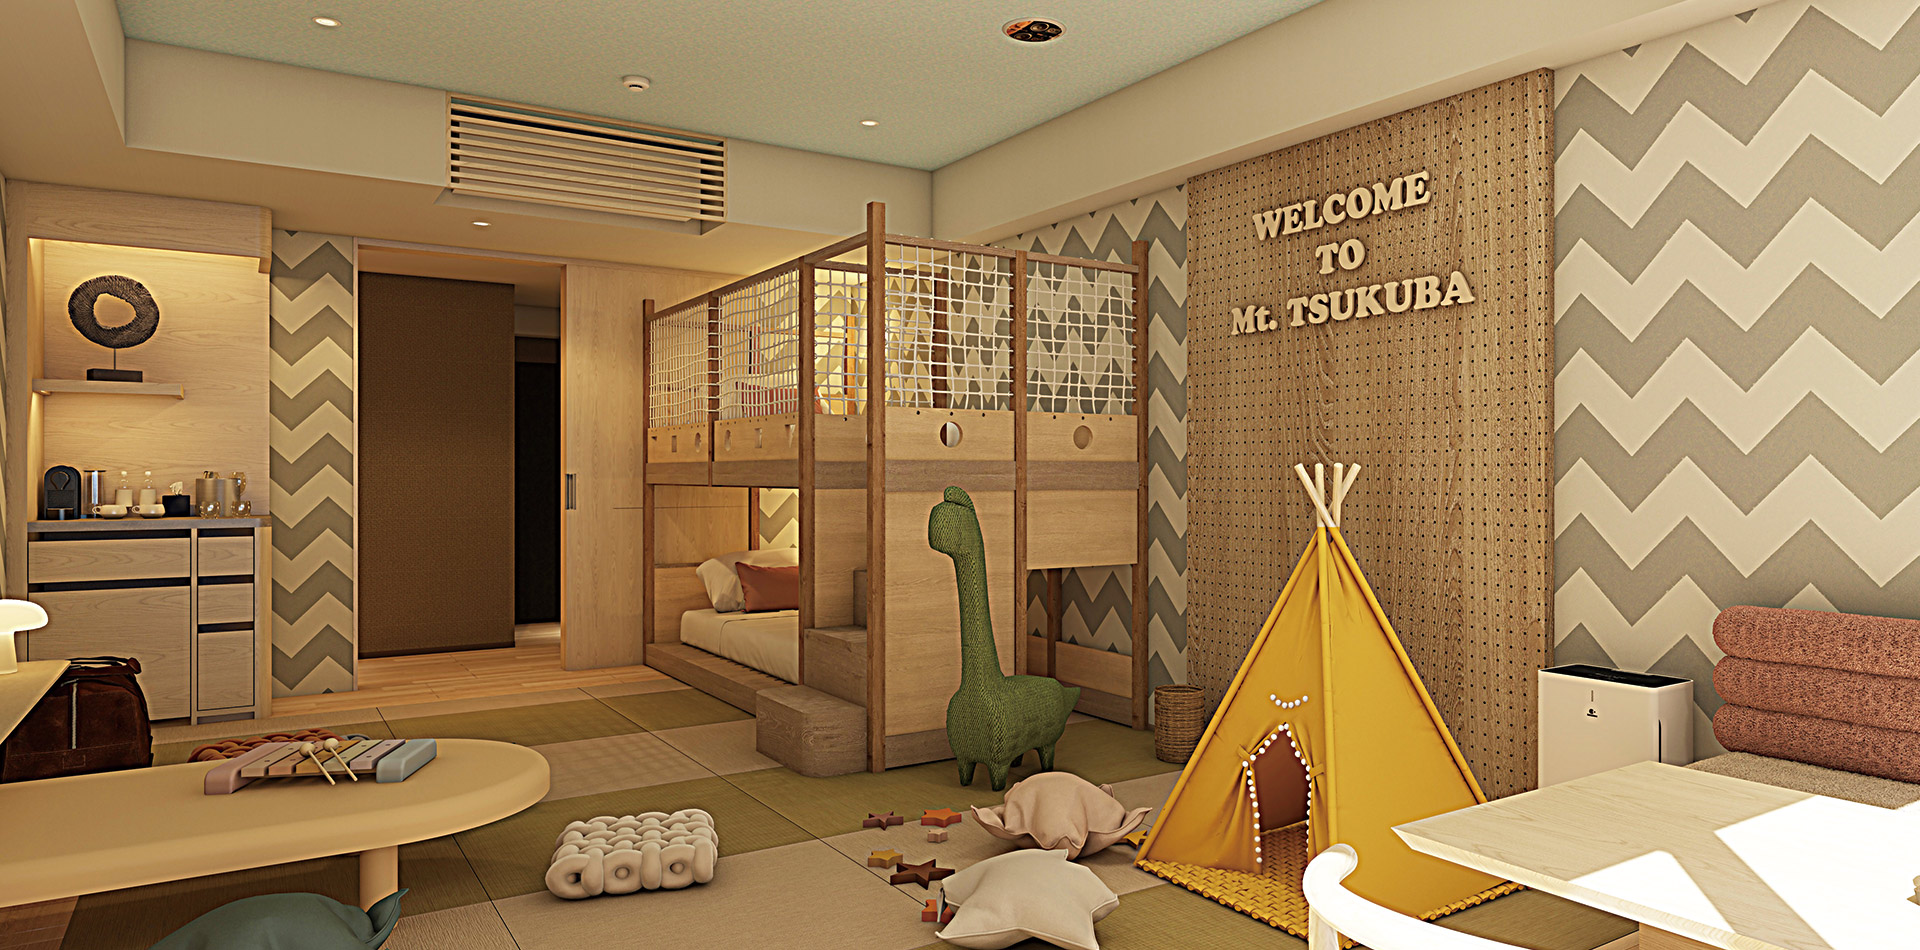 The kids' room is packed with features to pique your child's curiosity, including bunk beds and athletic nets.